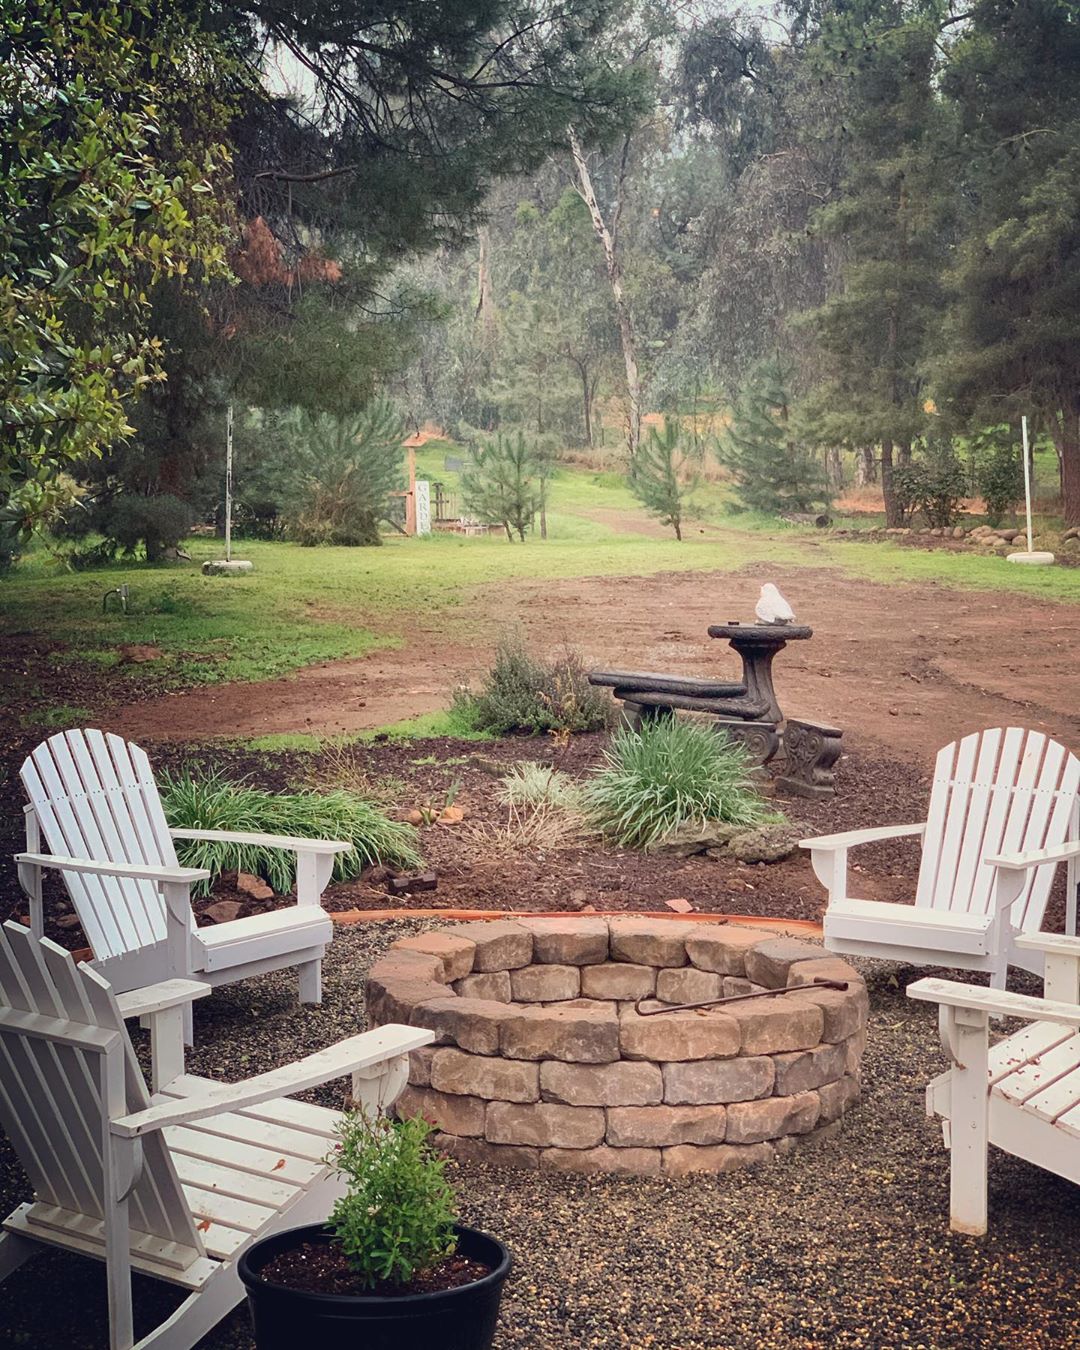 backyard fire pit built with large stones and white adirondack chairs around photo by Instagram user @claudio_paisagismo